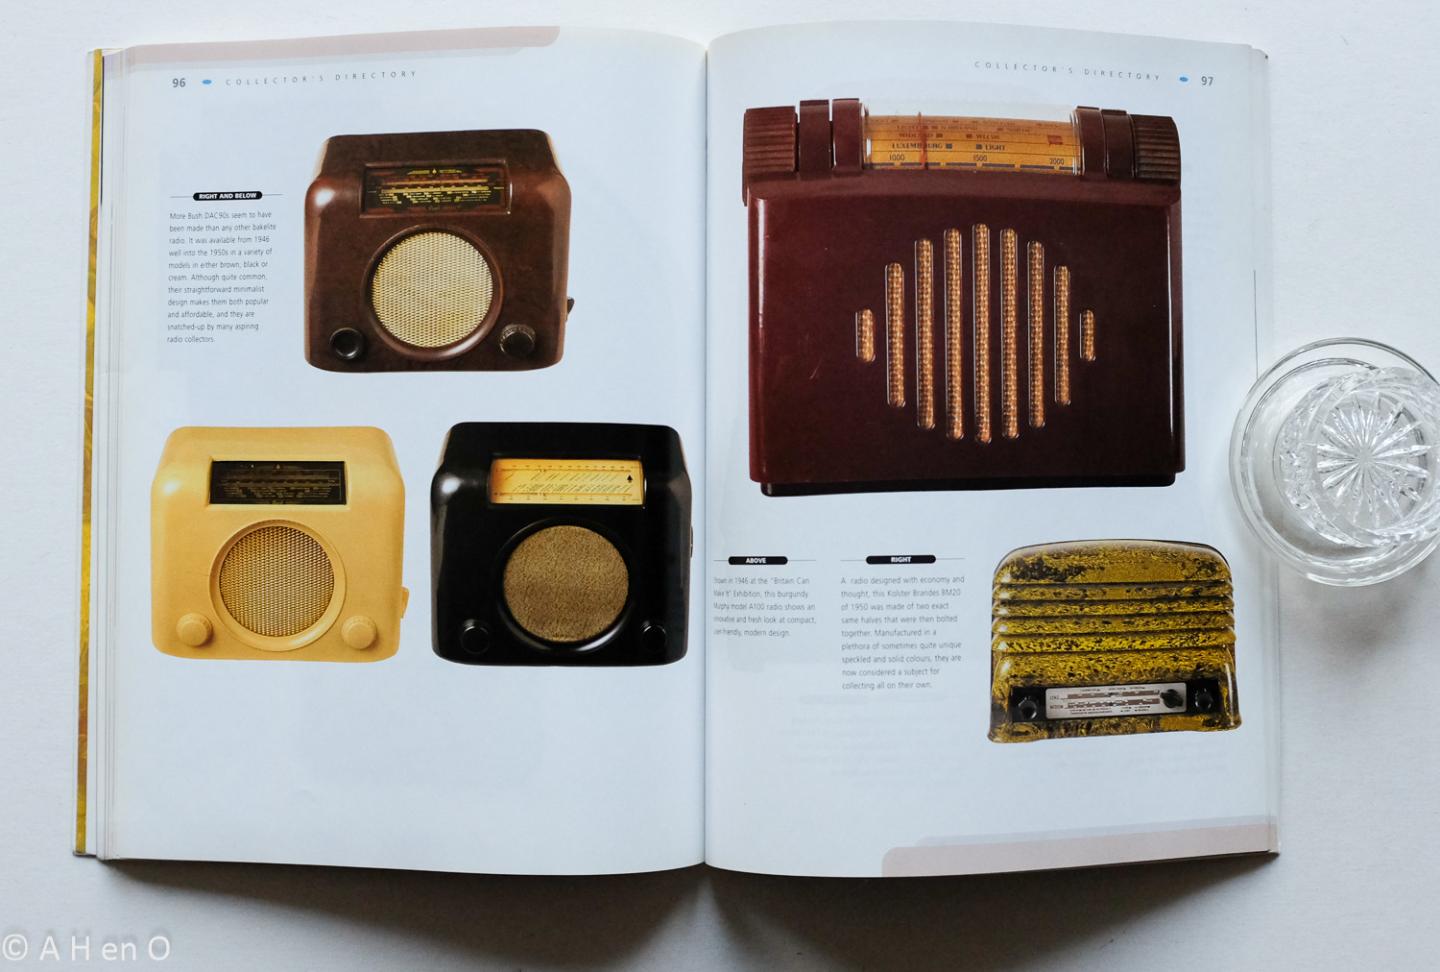 Hawes, Robert; Gad Sassower - Bakelite radios : the collector's guide to the style and beauty of the bakelite radio